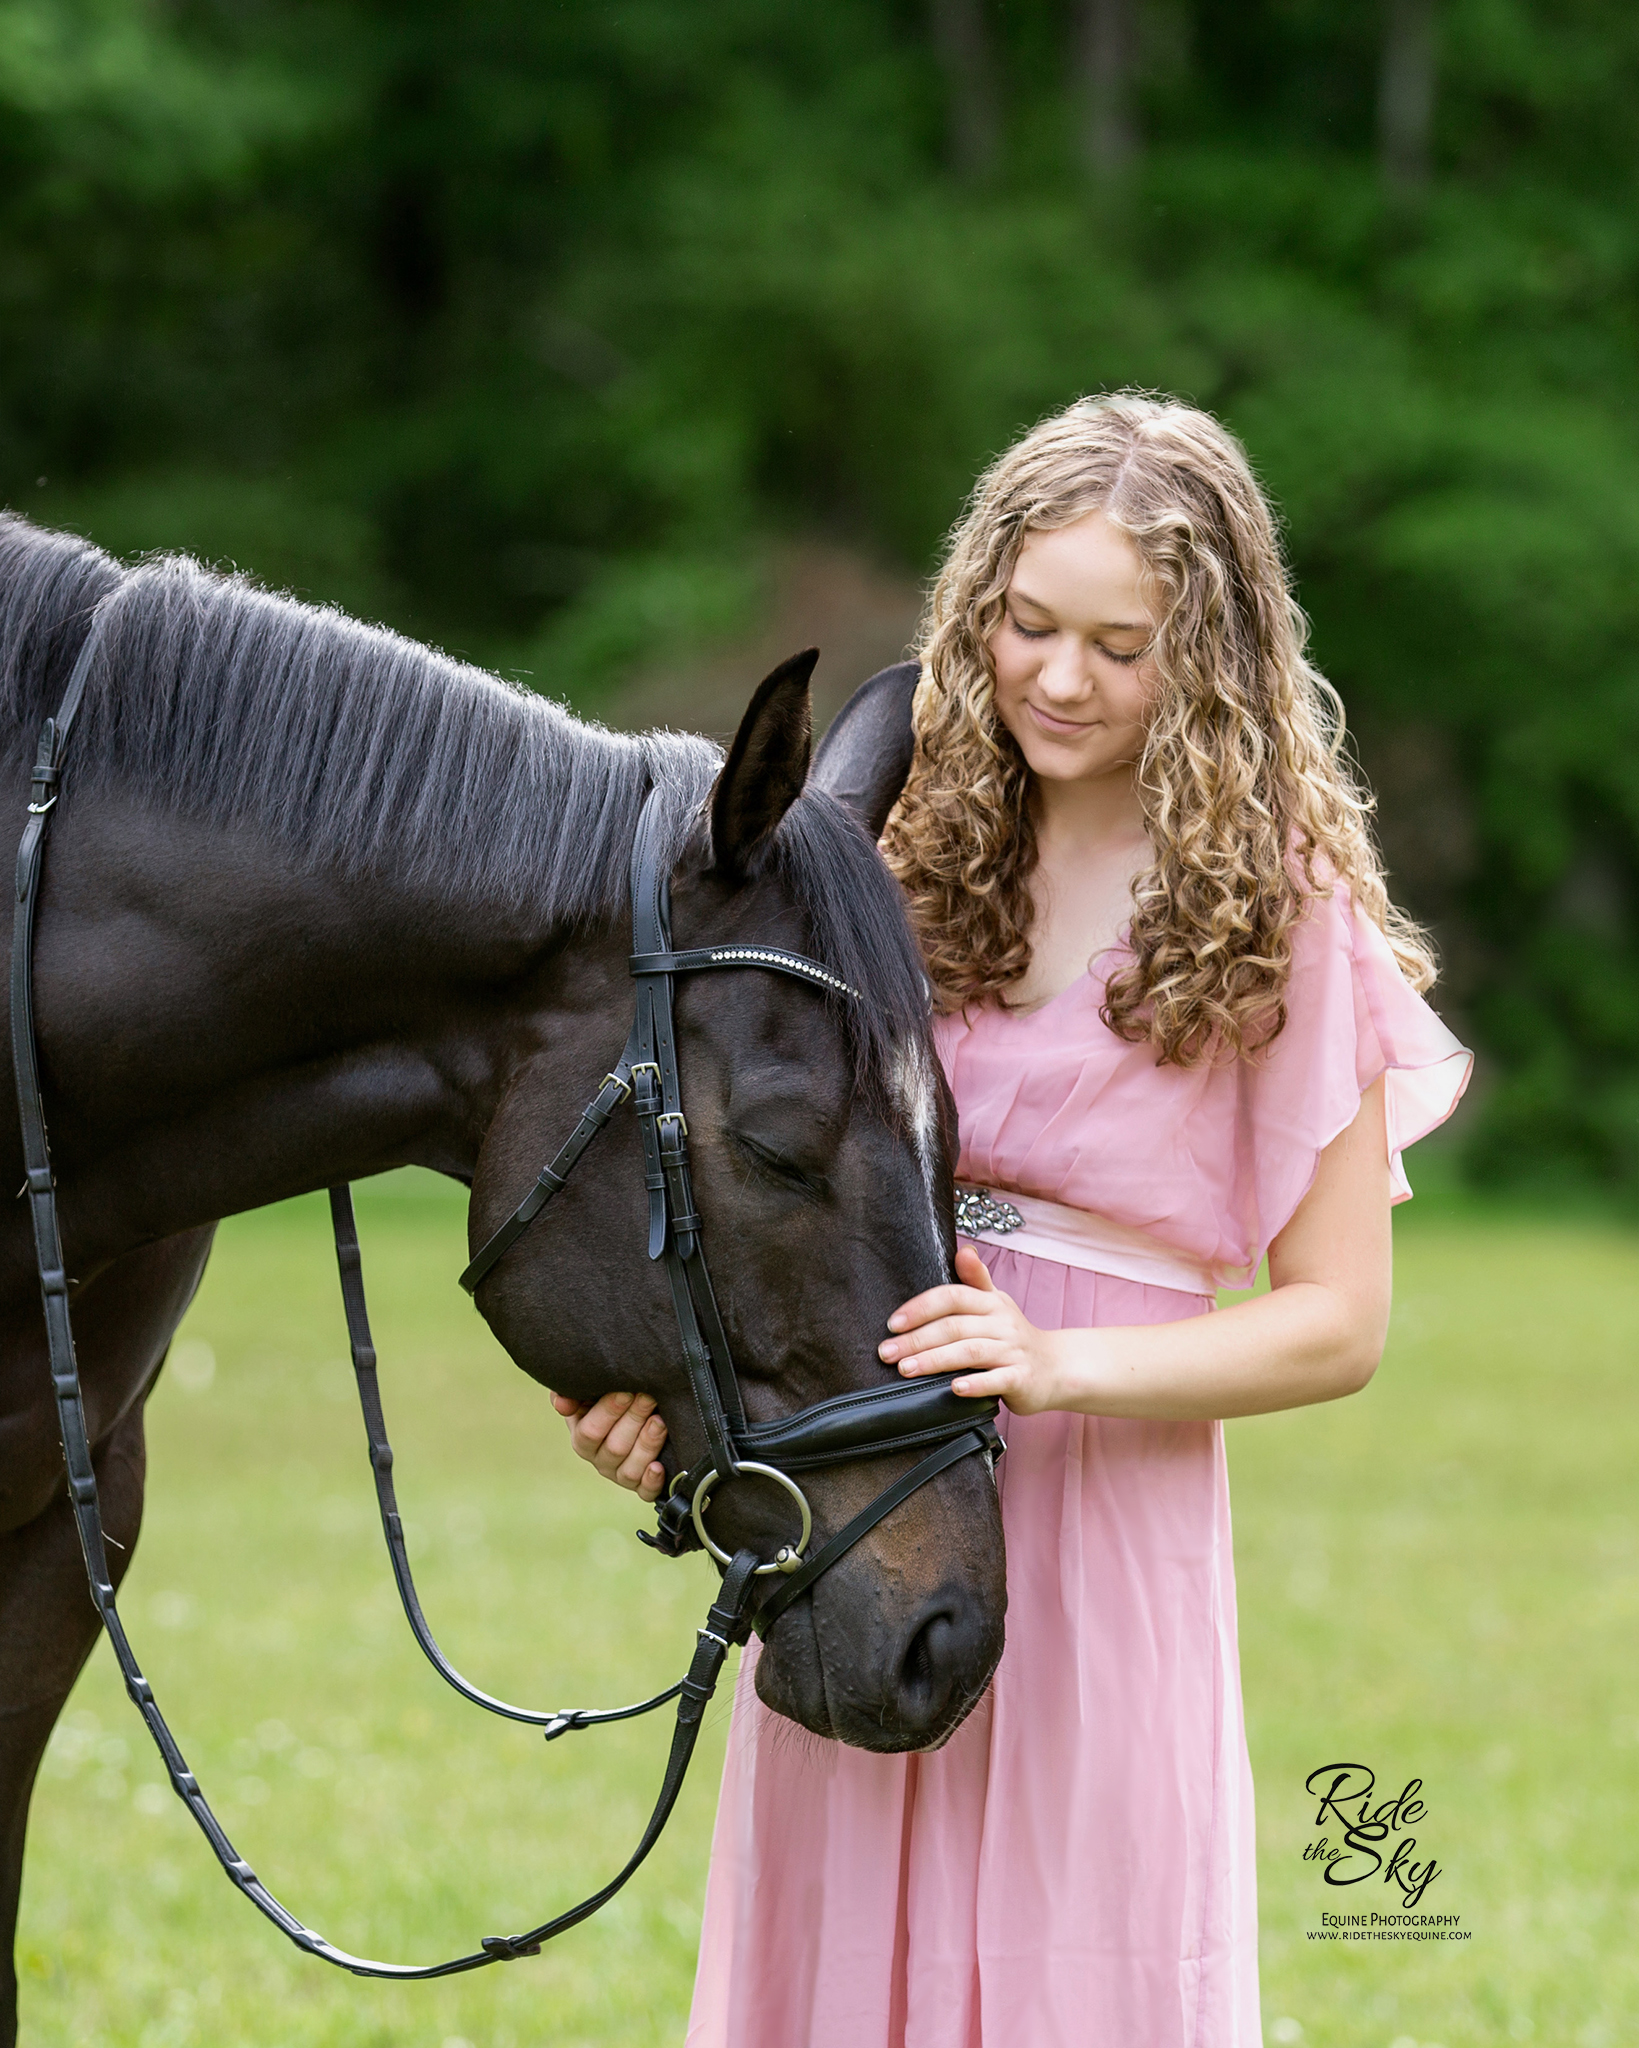 High School Senior photographed with her thoroughbred horse during a sweet moment